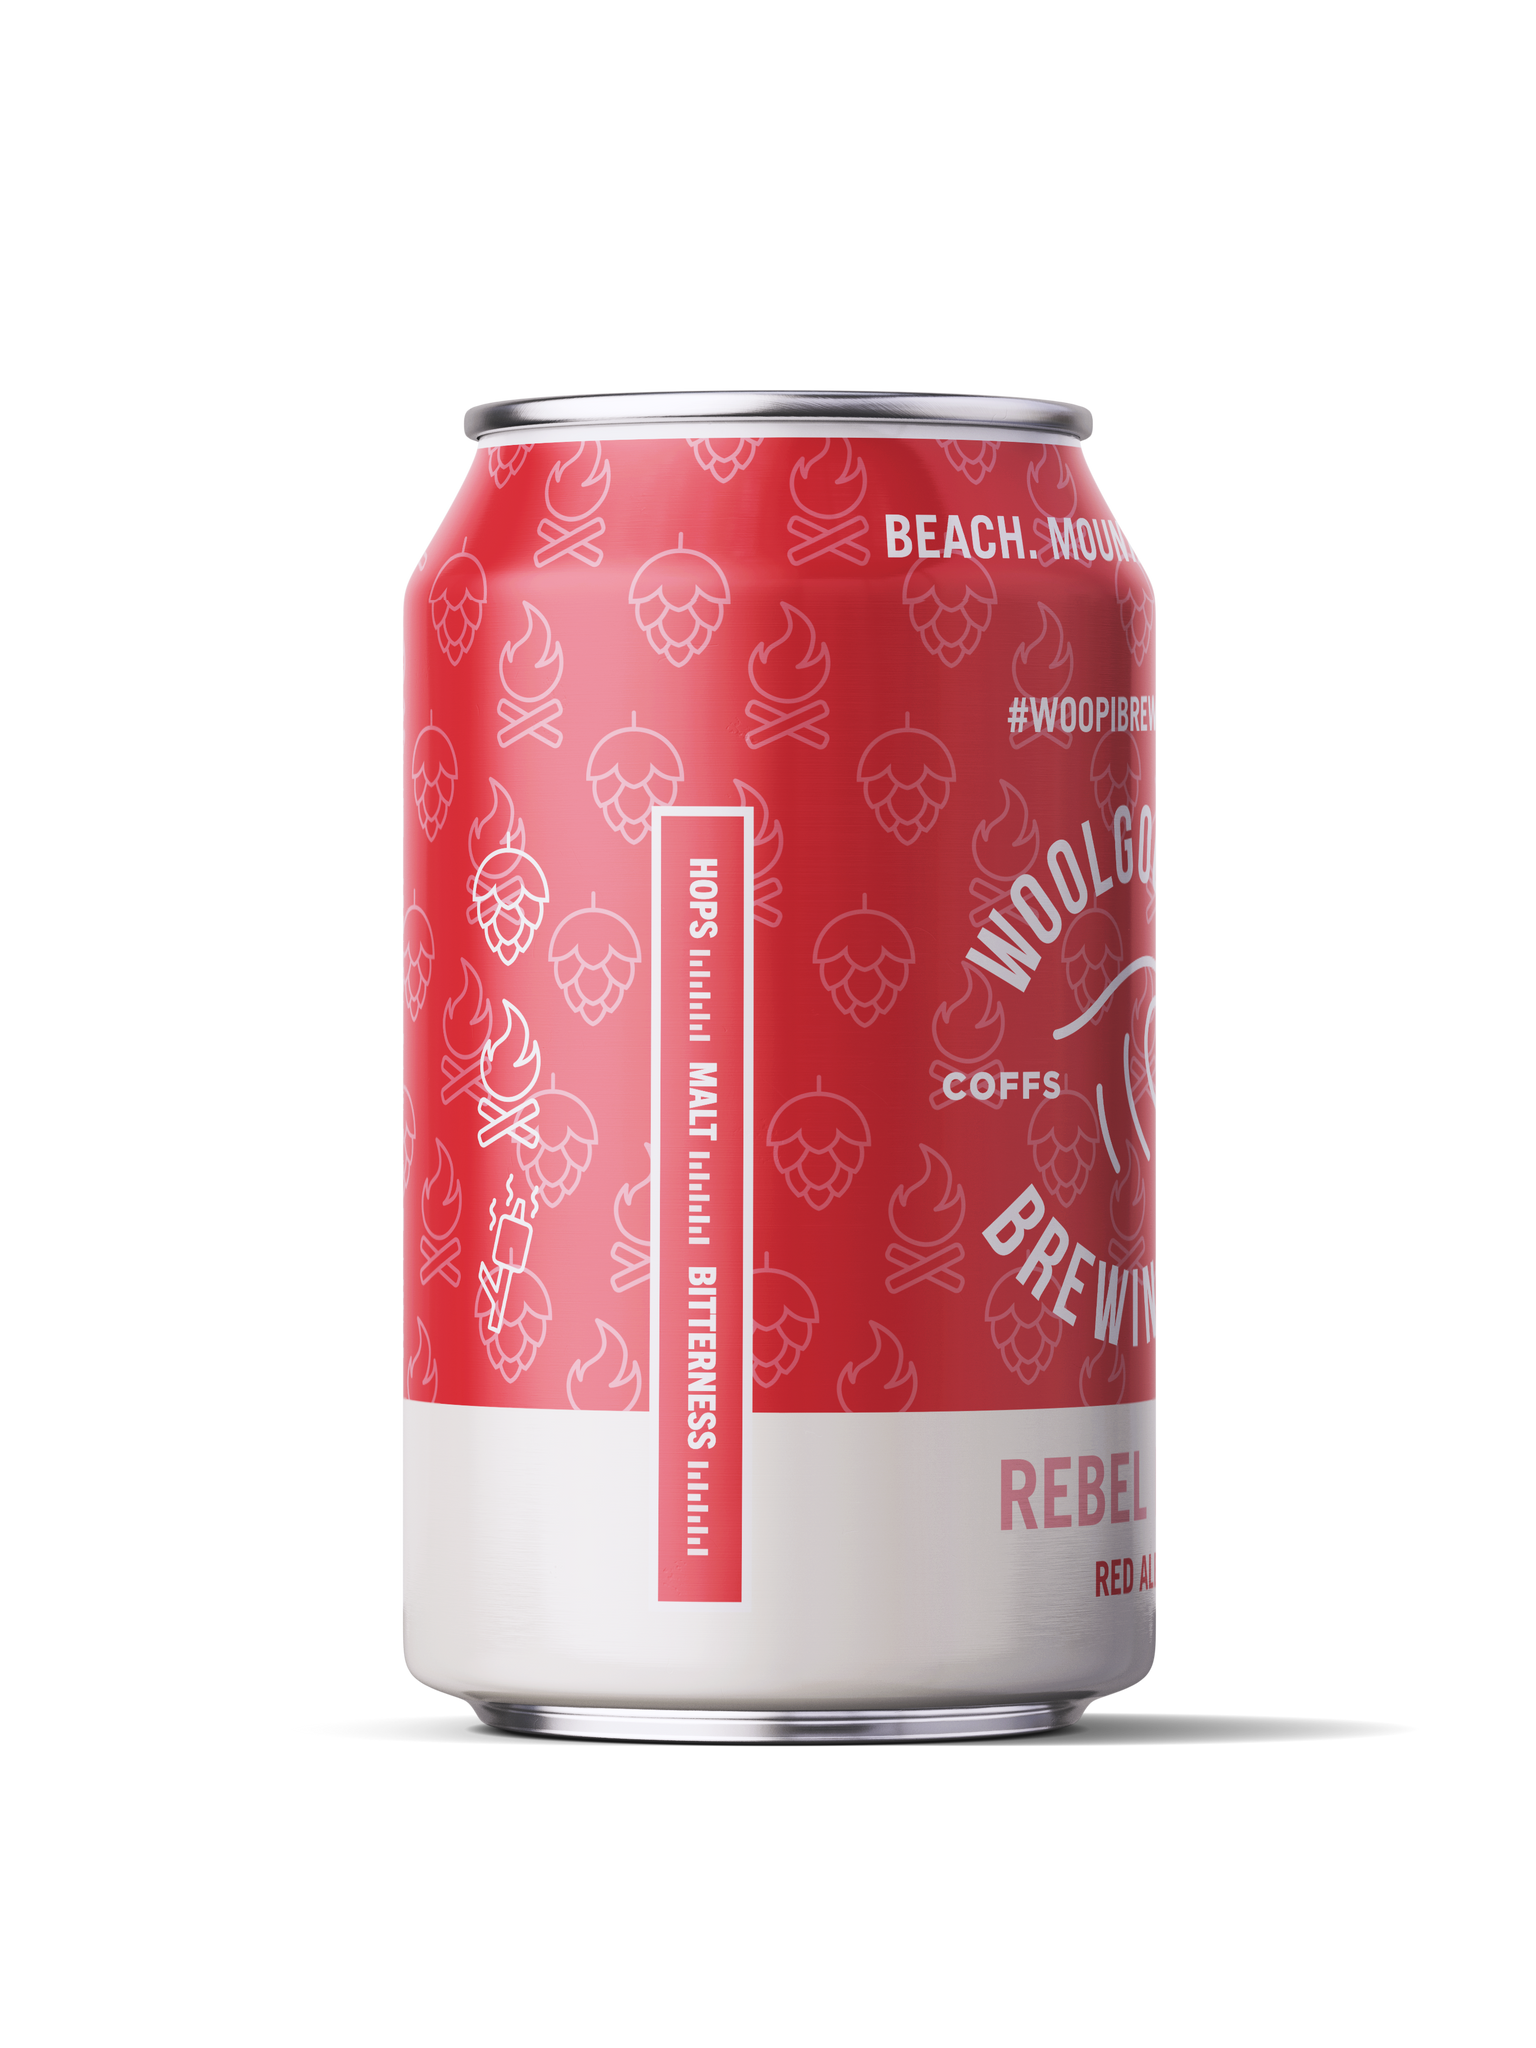 Rebel Red Cans - 5.9% ABV